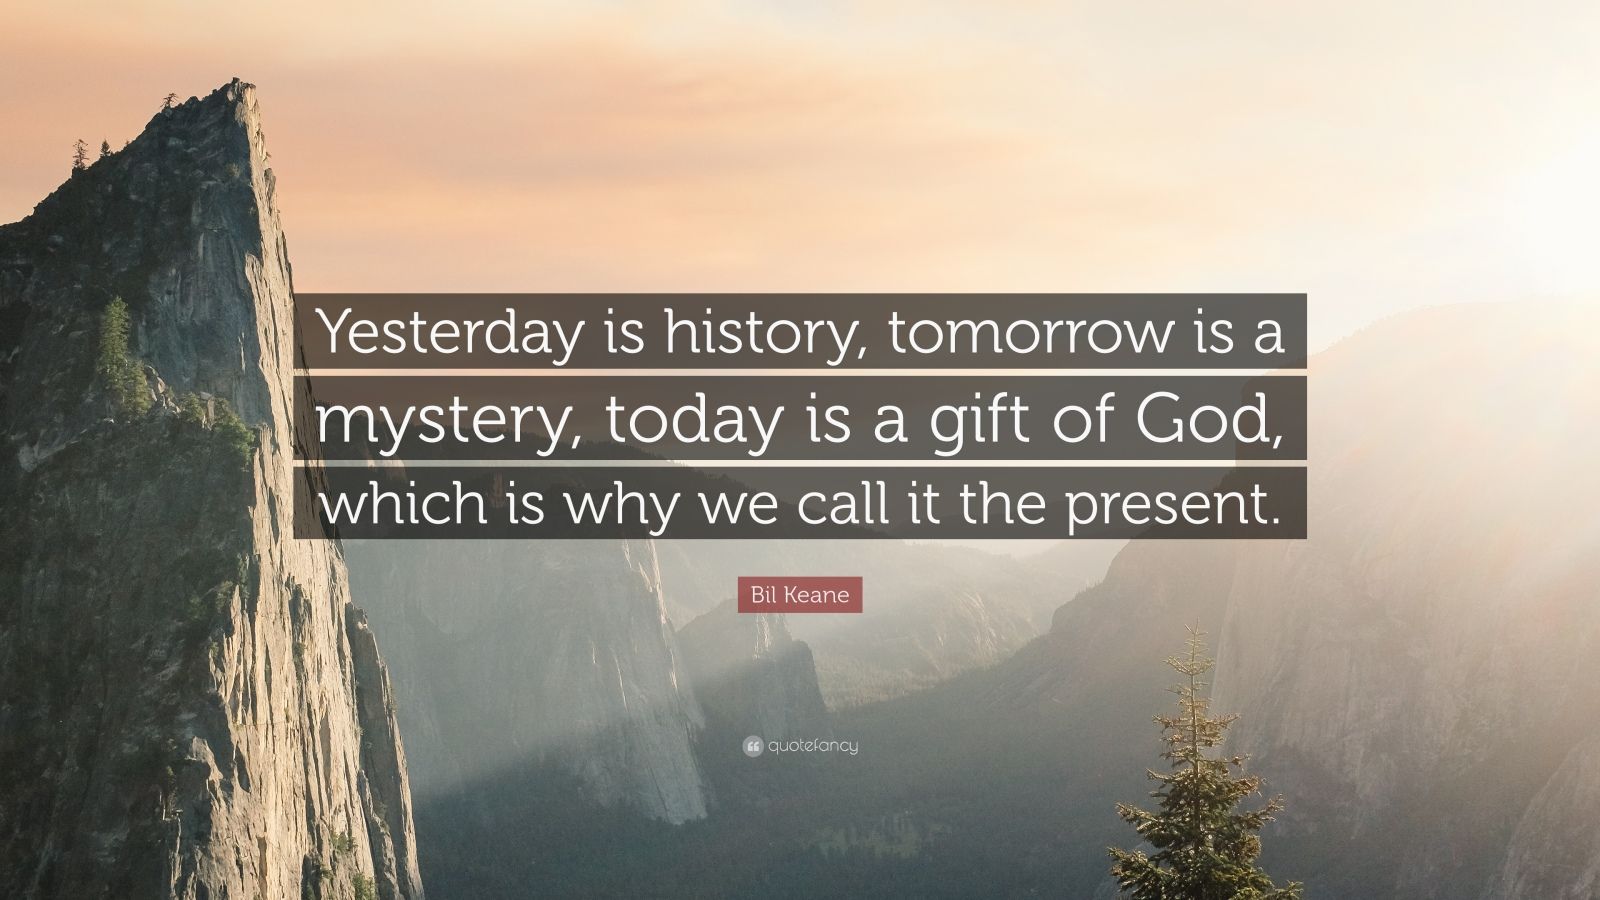 Bil Keane Quote: “Yesterday is history, tomorrow is a mystery, today is